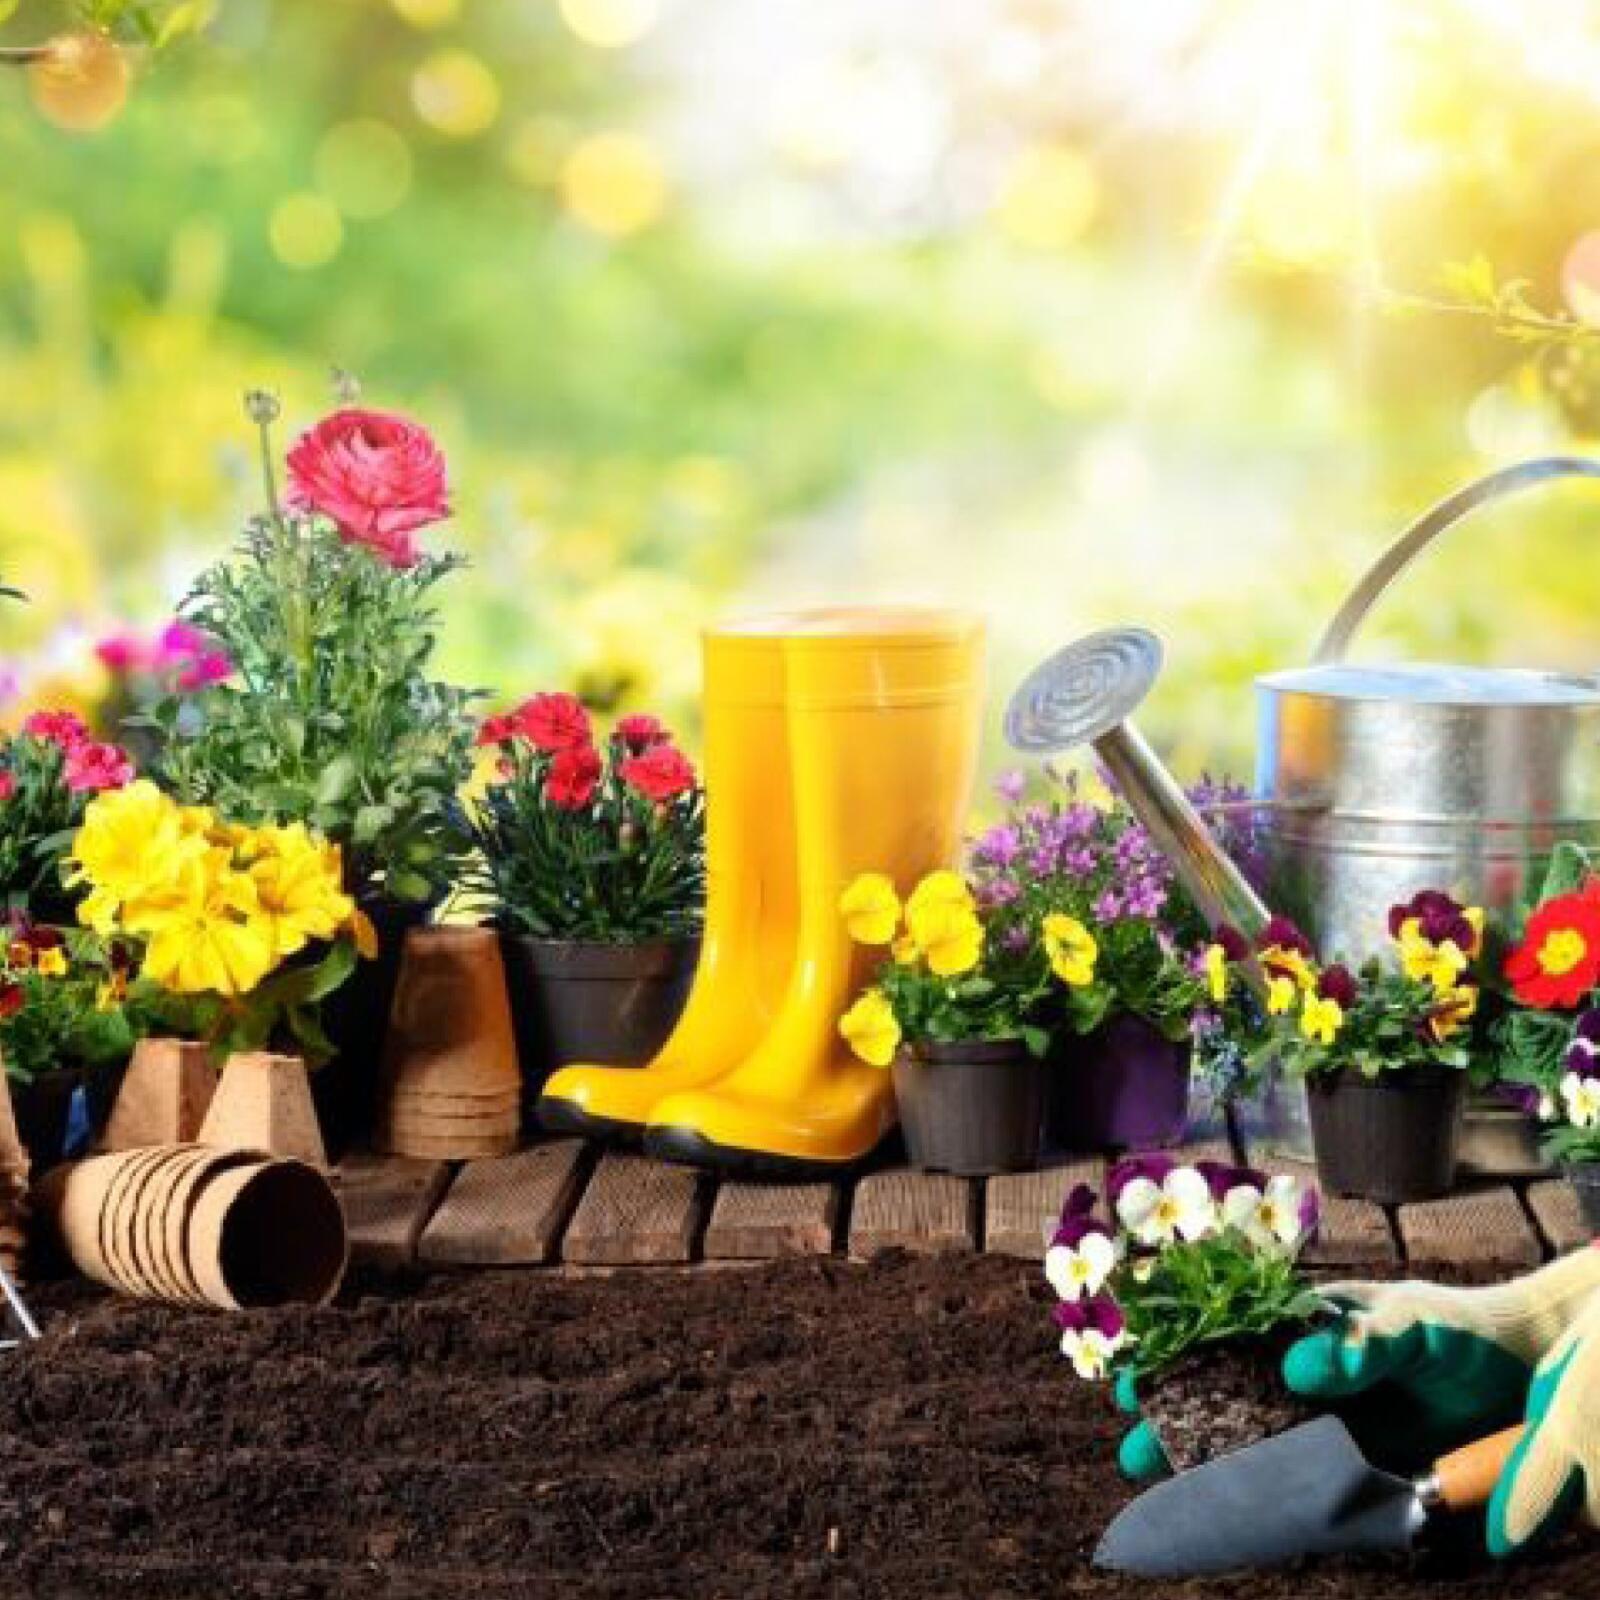 A group of gardening tools and flowers.